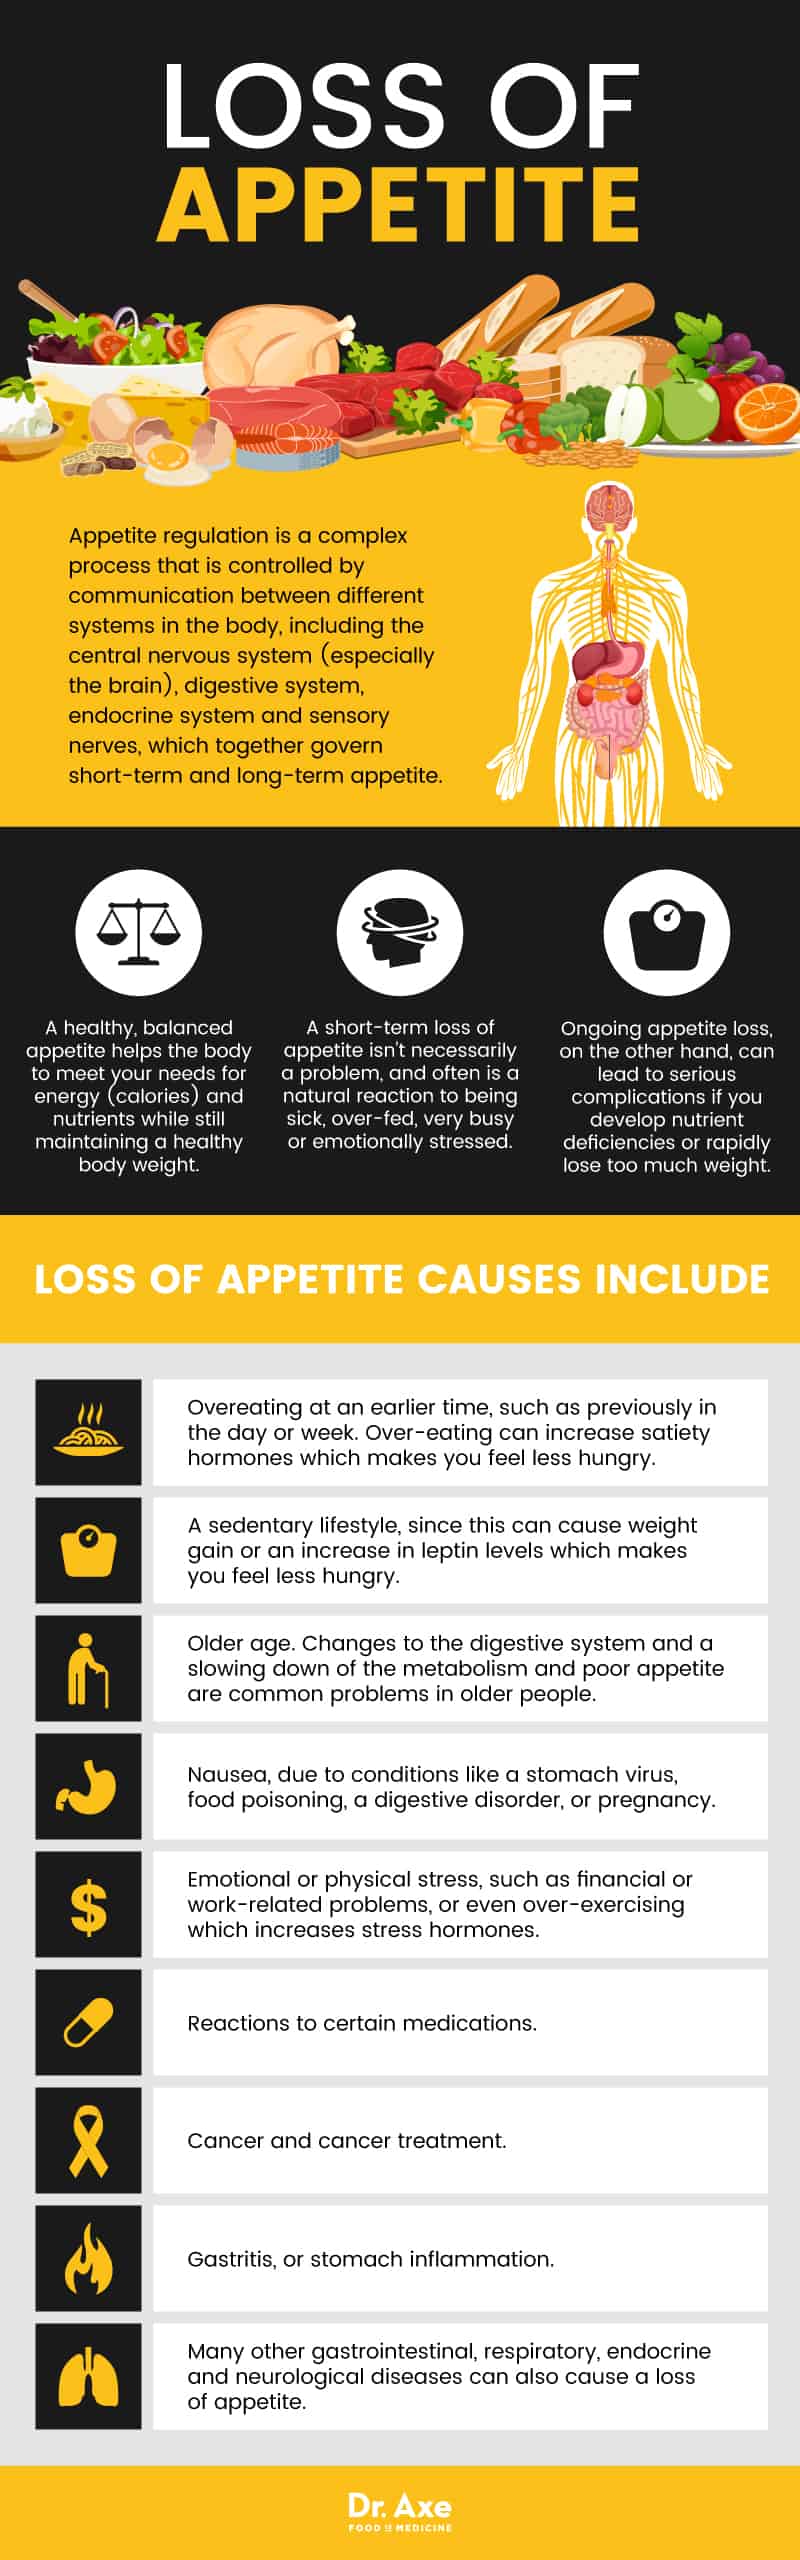 About loss of appetite - Dr. Axe